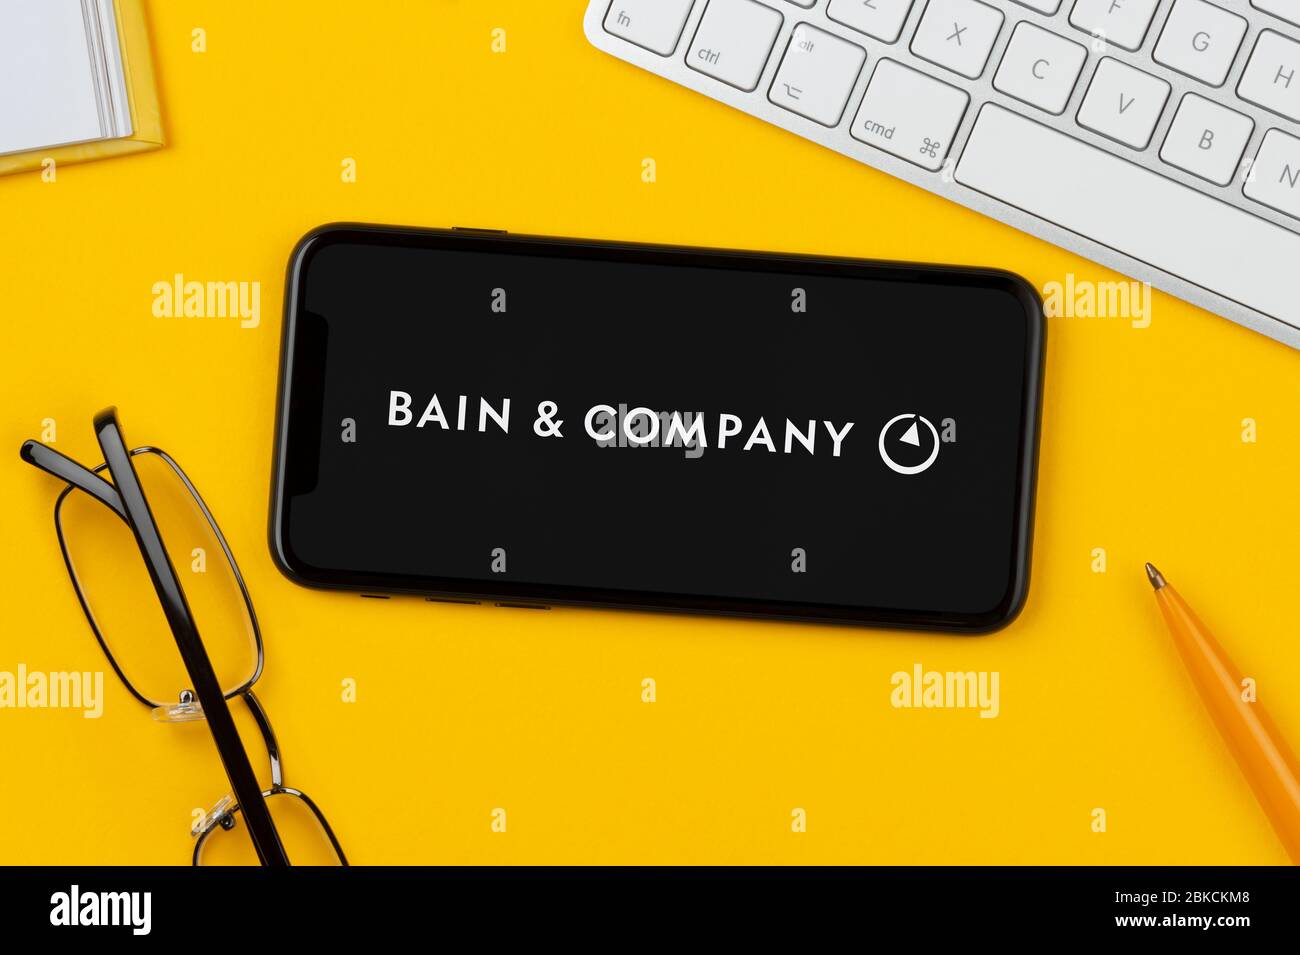 A smartphone showing the Bains & Company logo rests on a yellow background along with a keyboard, glasses, pen and book (Editorial use only). Stock Photo